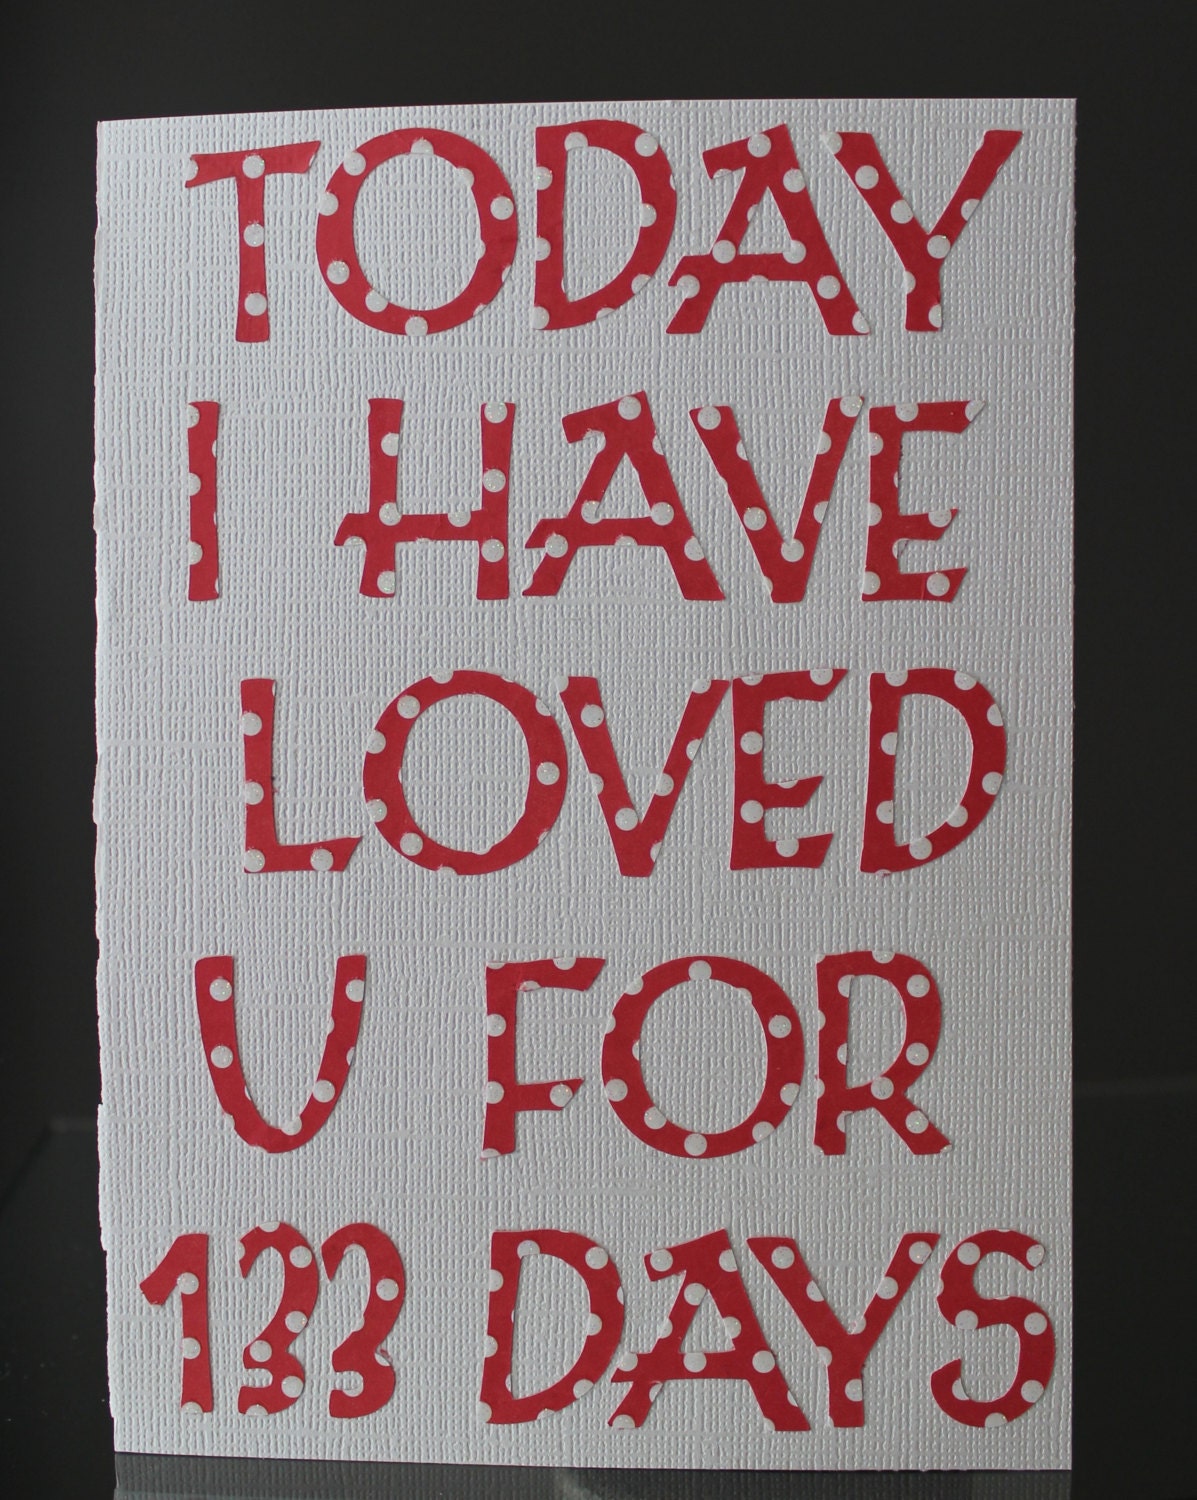 Valentines Day card by IttyBittyDesignsbyL on Etsy